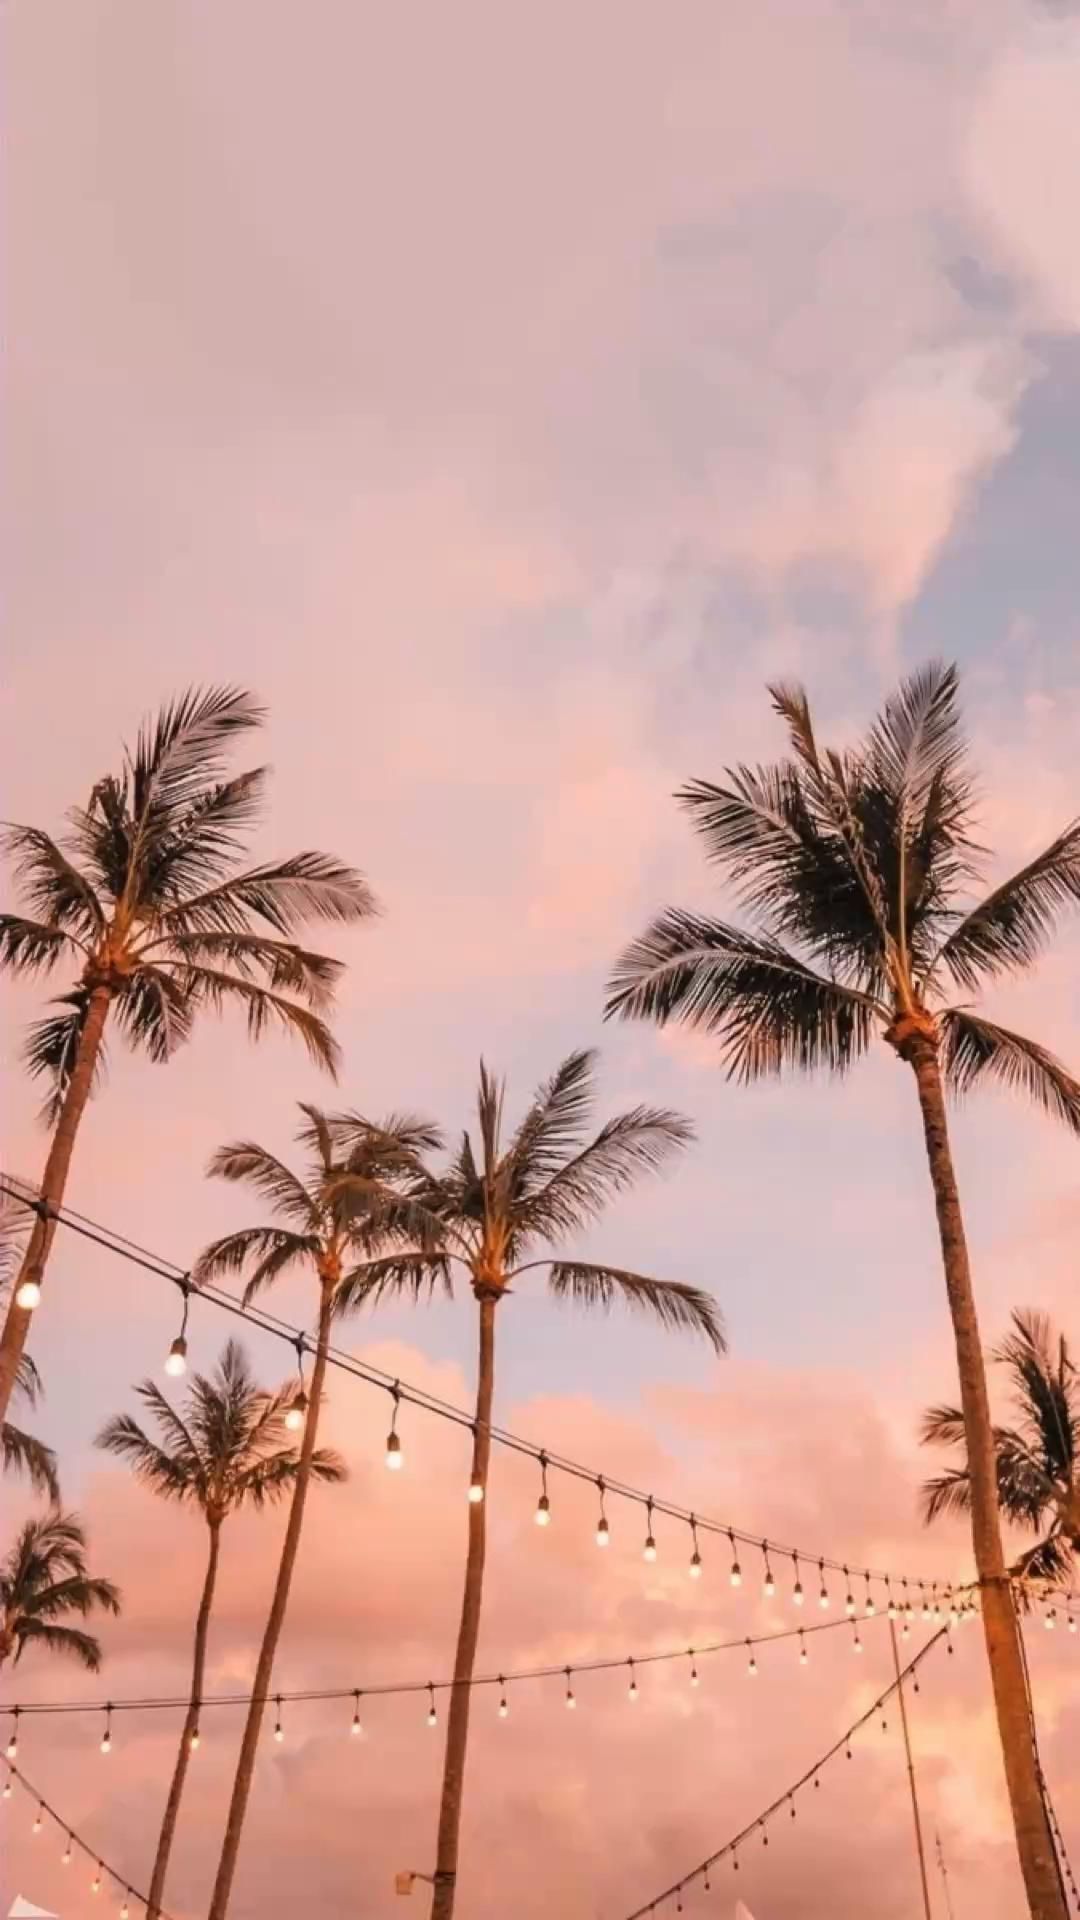 A sunset in hawaii with palm trees - Palm tree, scenery